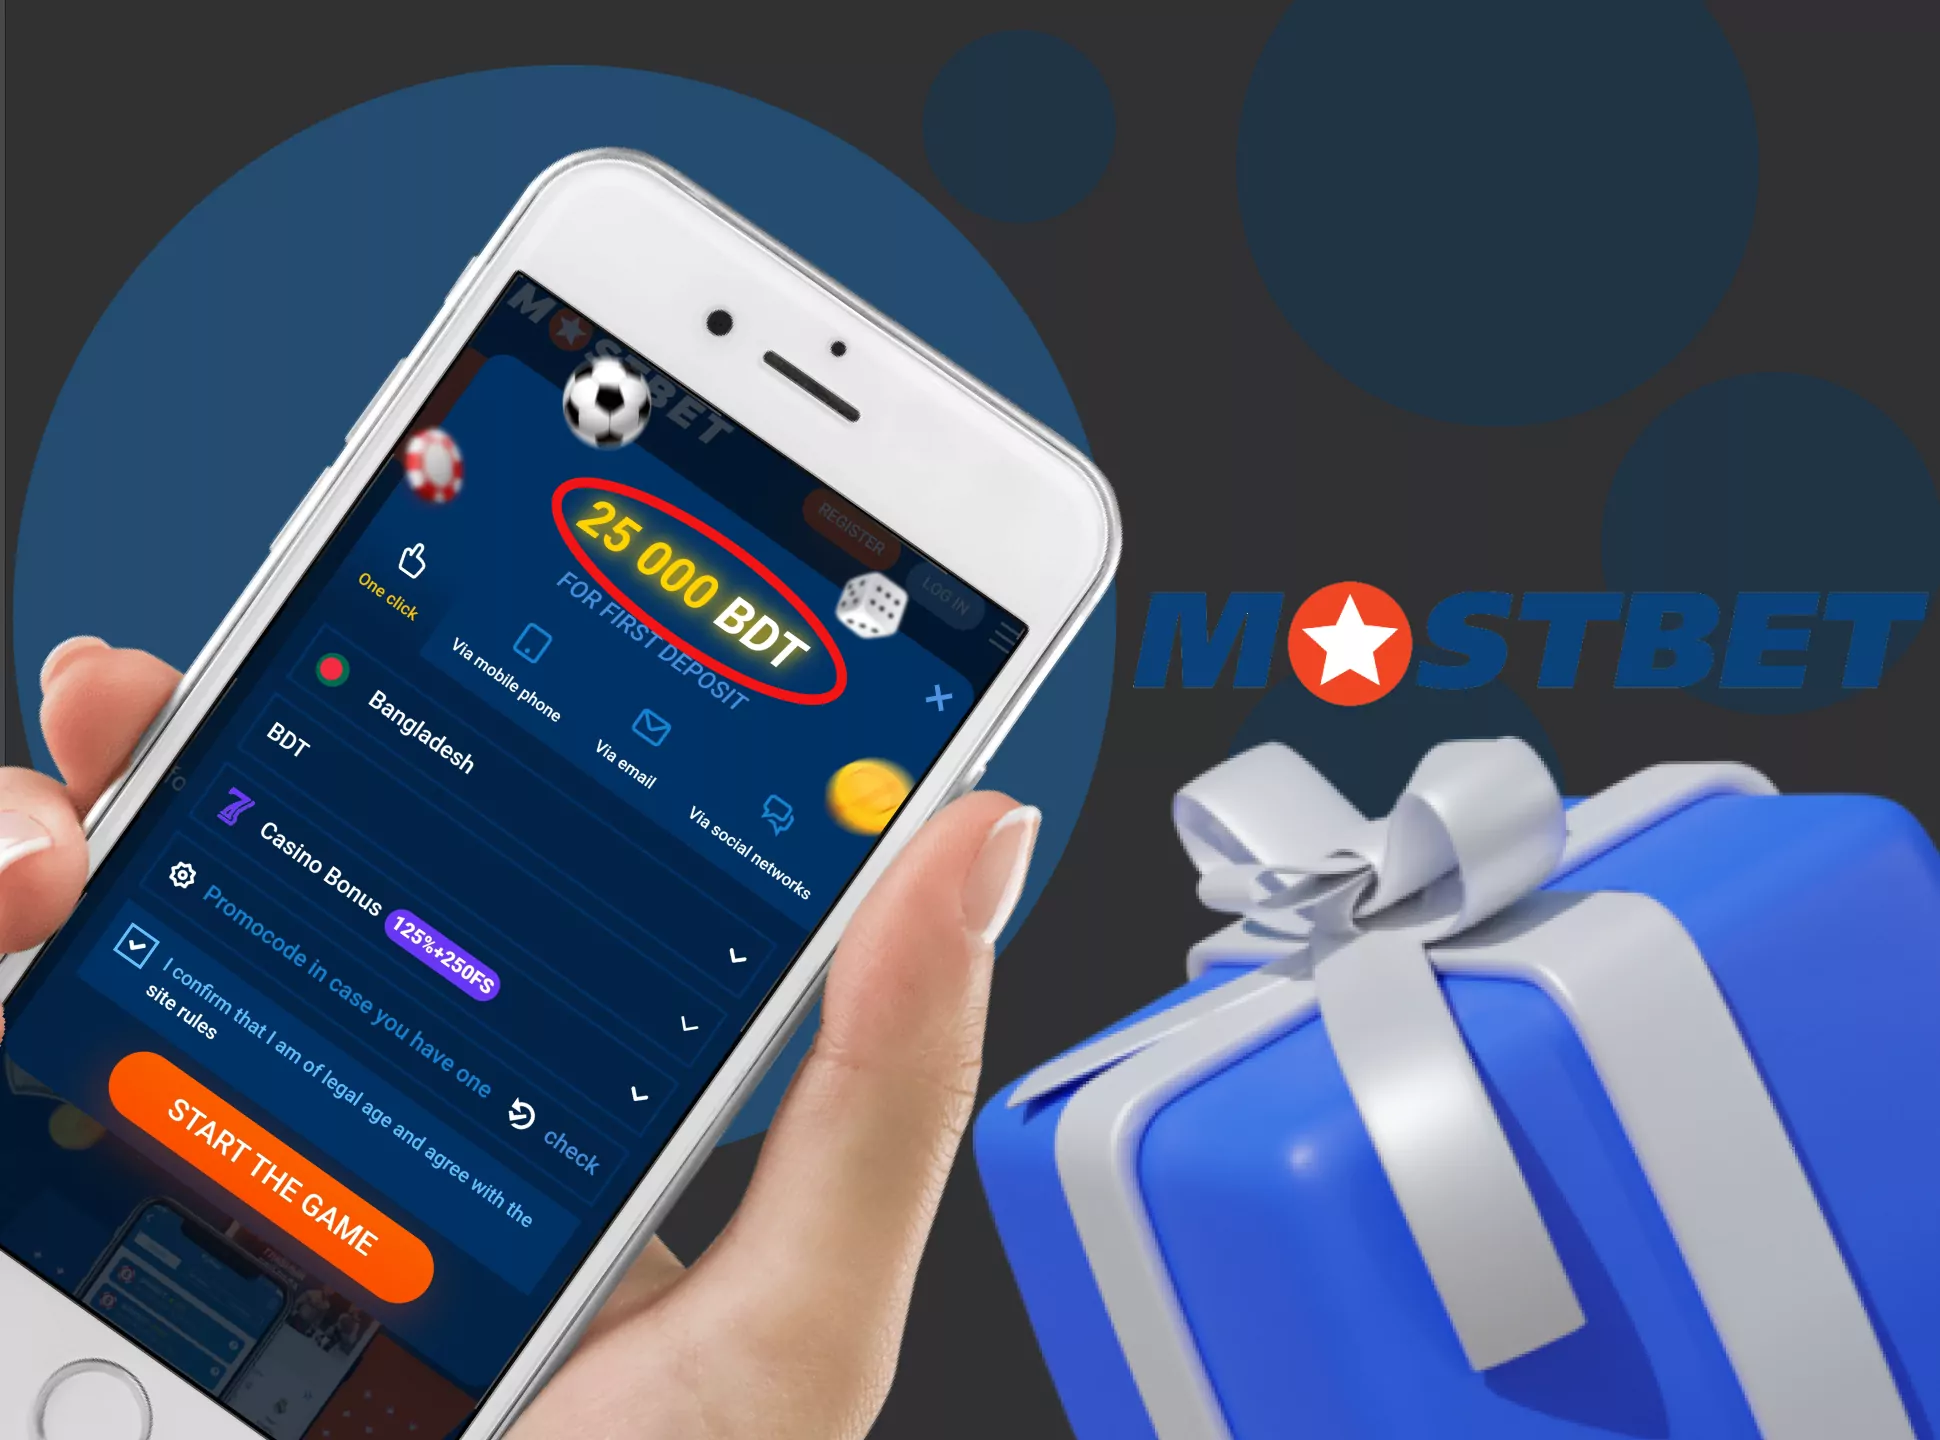 Register and make the first depost at Mostbet and get a bonus of up to 25,000 BDT.